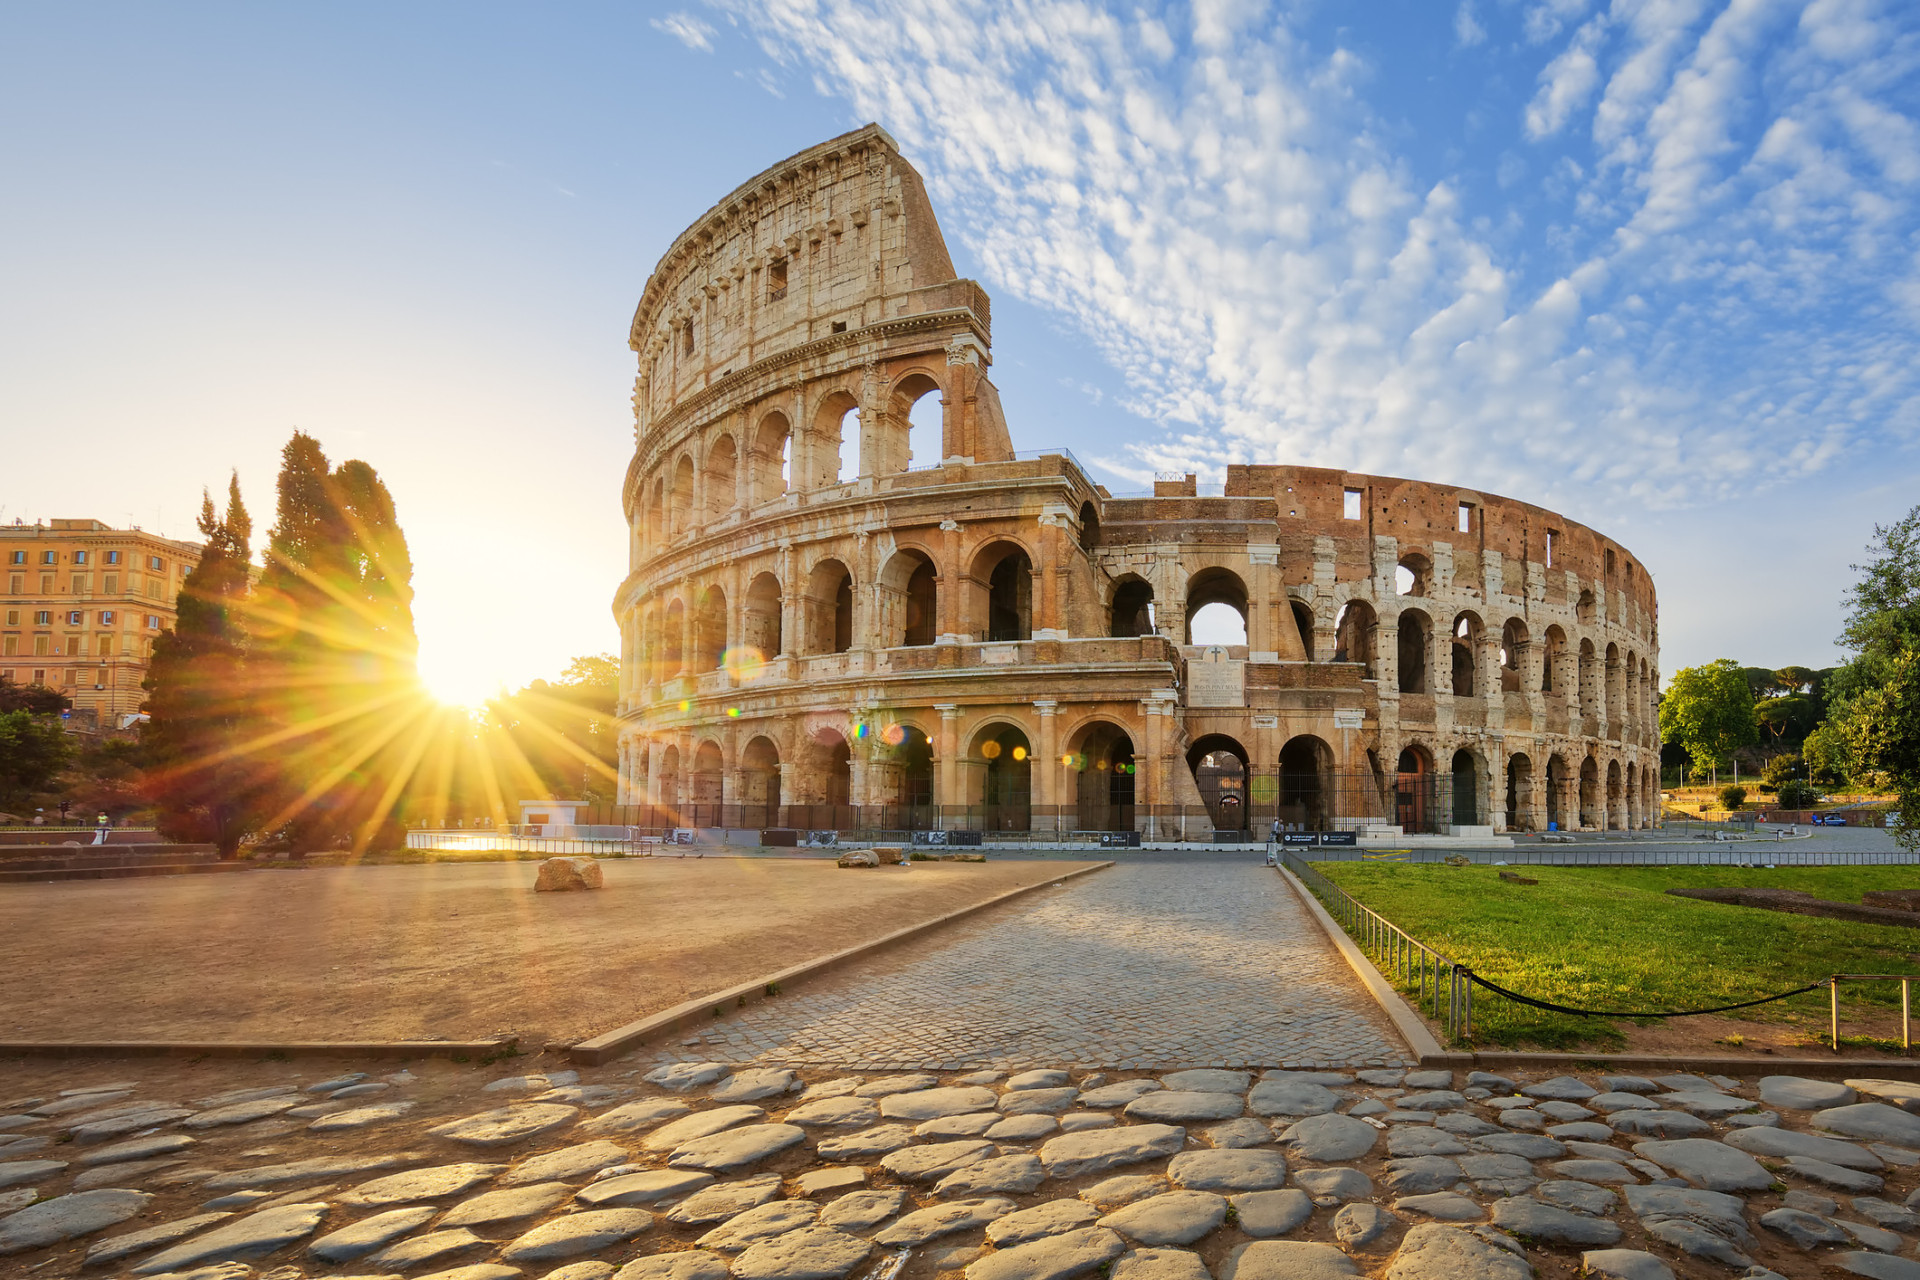 Rome has had a bad reputation among solo travellers in the past. However, that's changing!